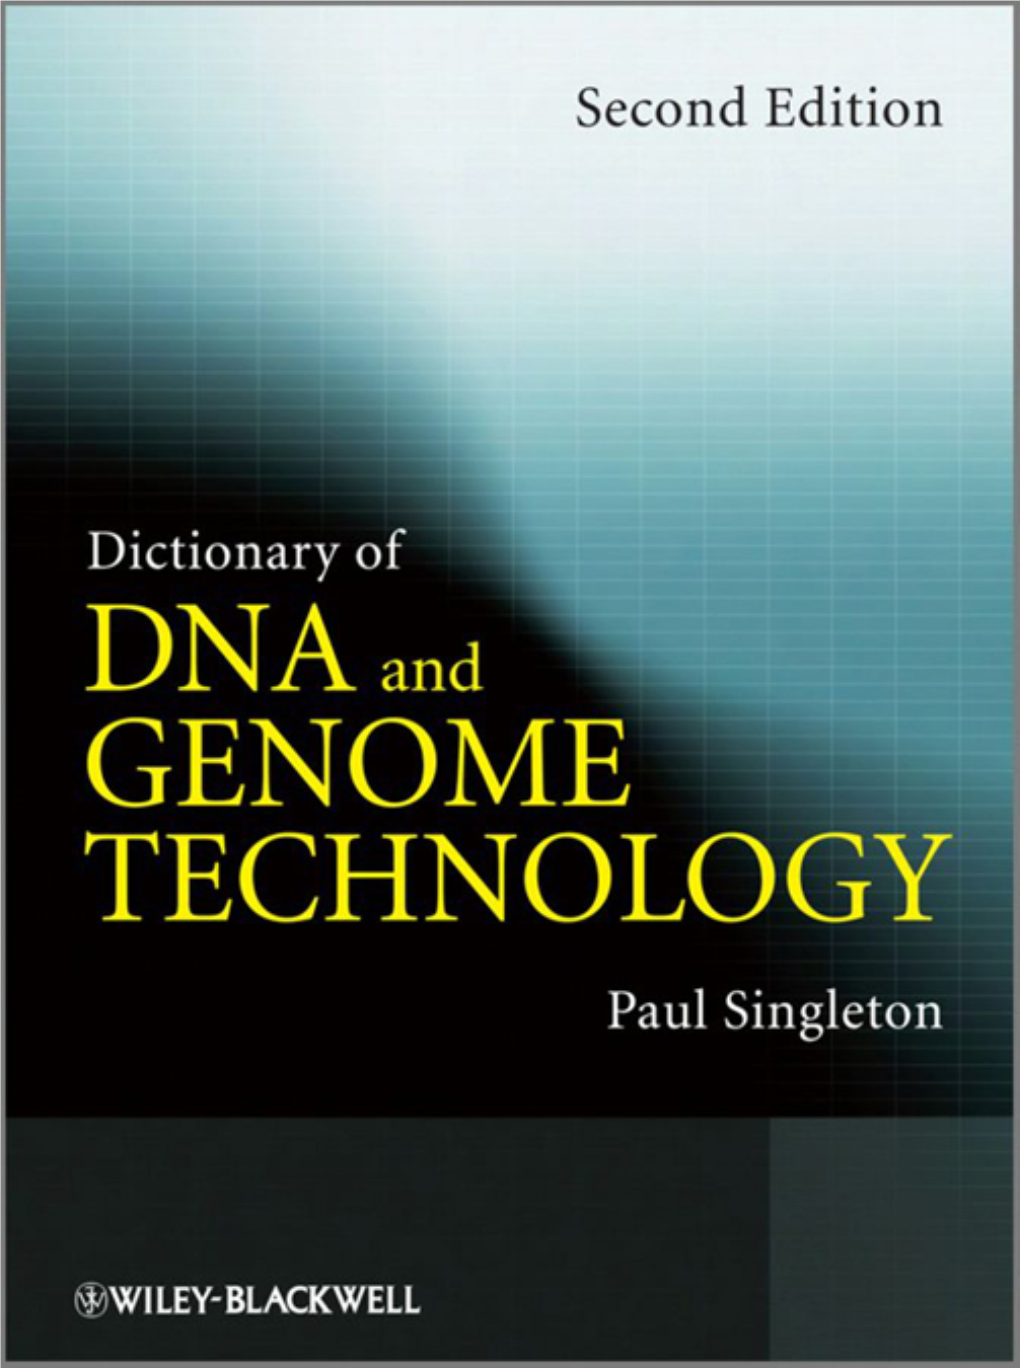 Dictionary of DNA and Genome Technology, Second Edition